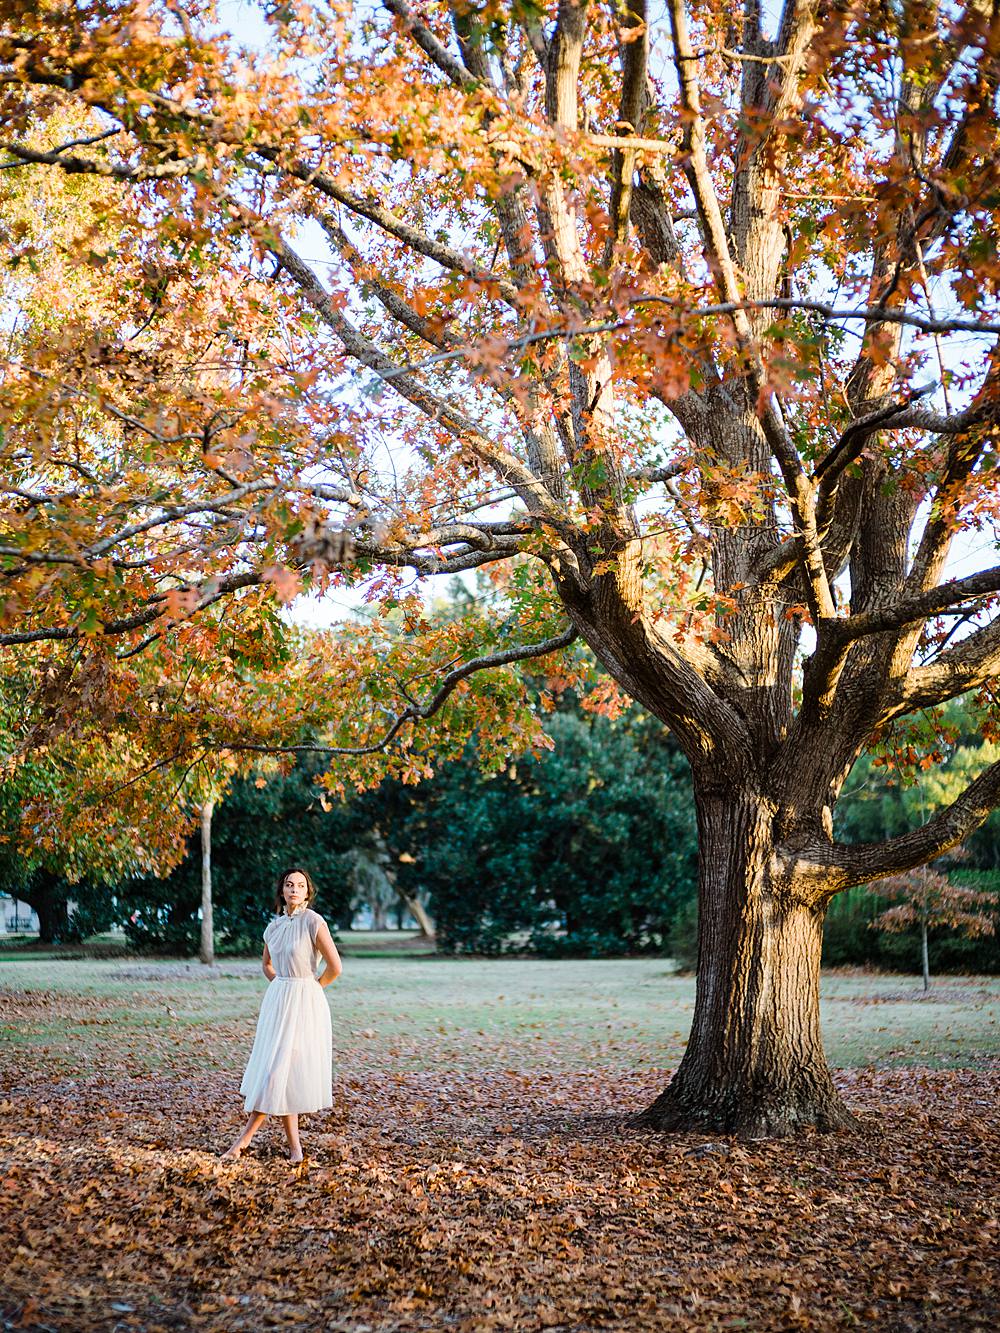 hampton park charleston south carolina lifestyle portrait with girl in vintage white dress underneath tree with fall colors by brian d smith photography